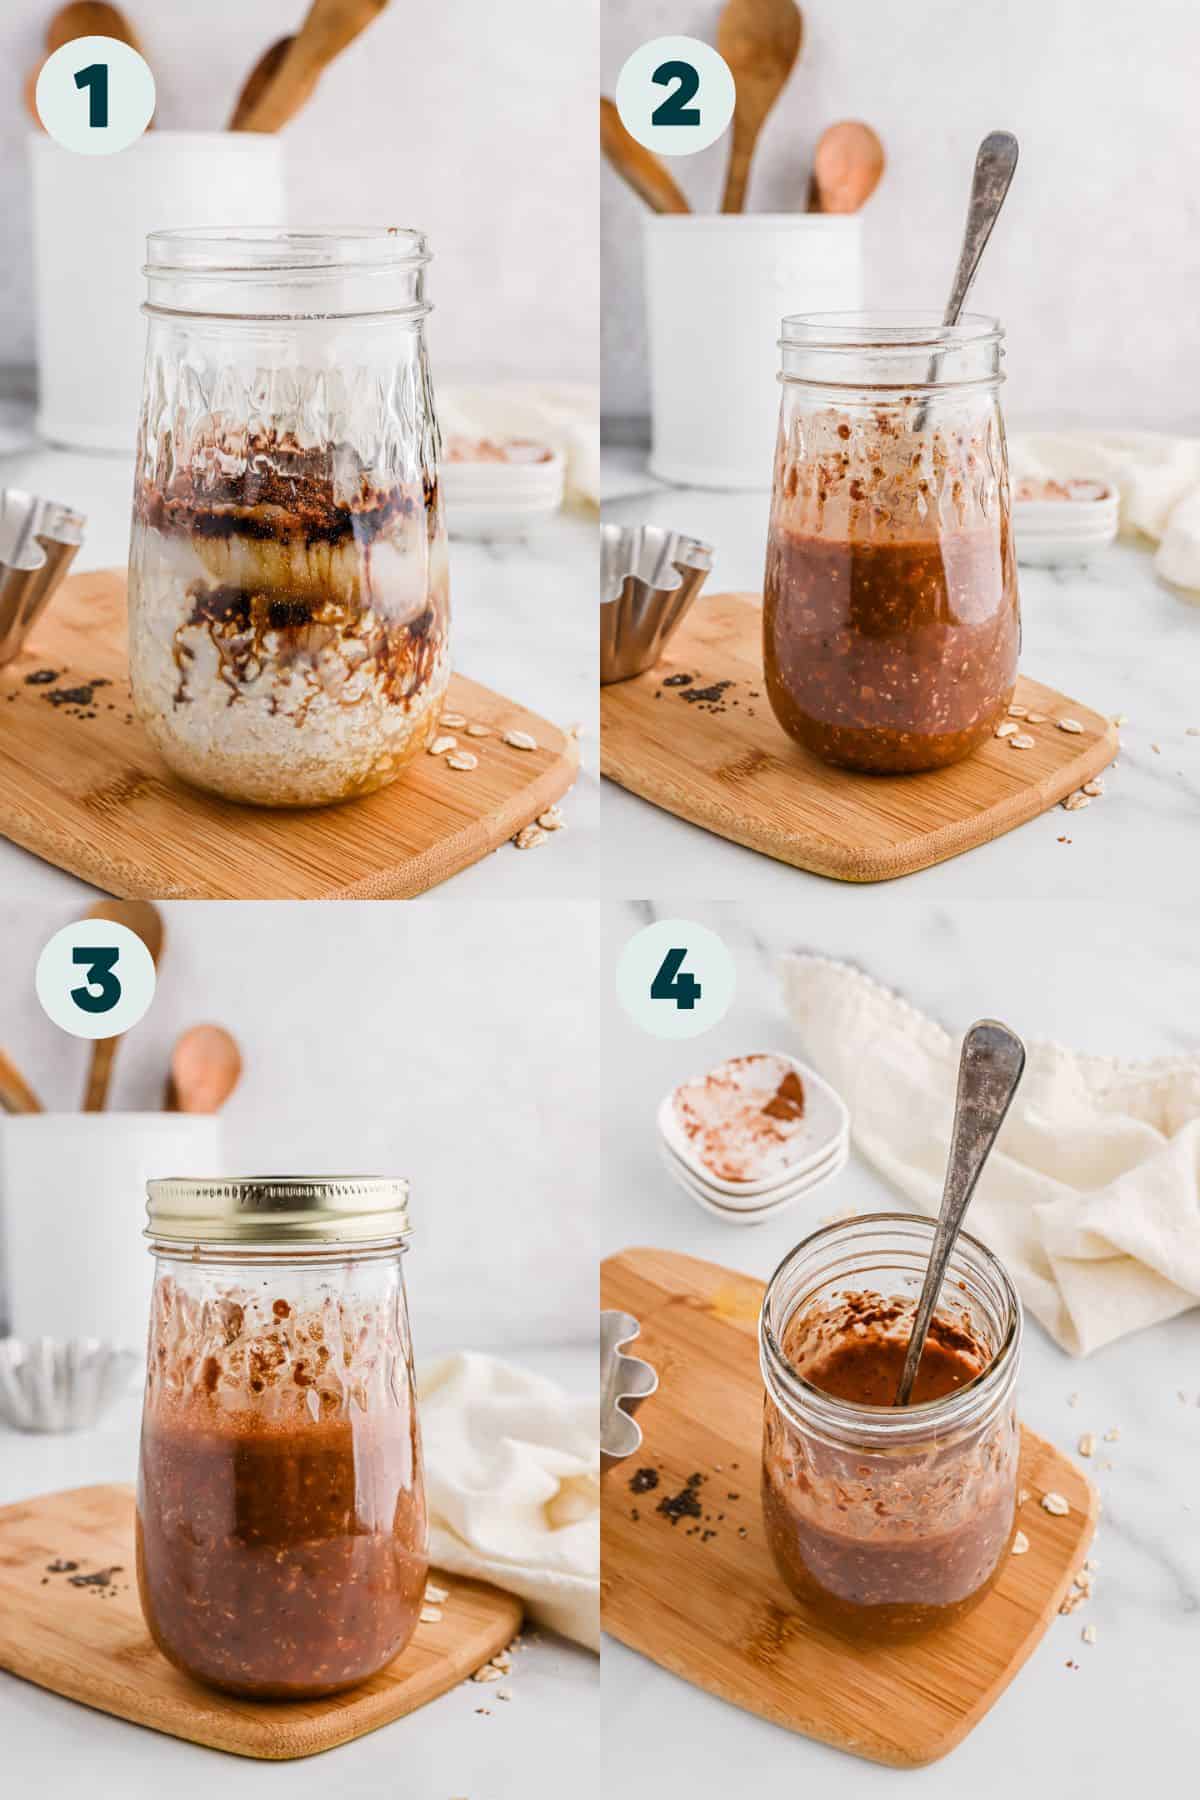 Step by step how to make Overnight Oats.